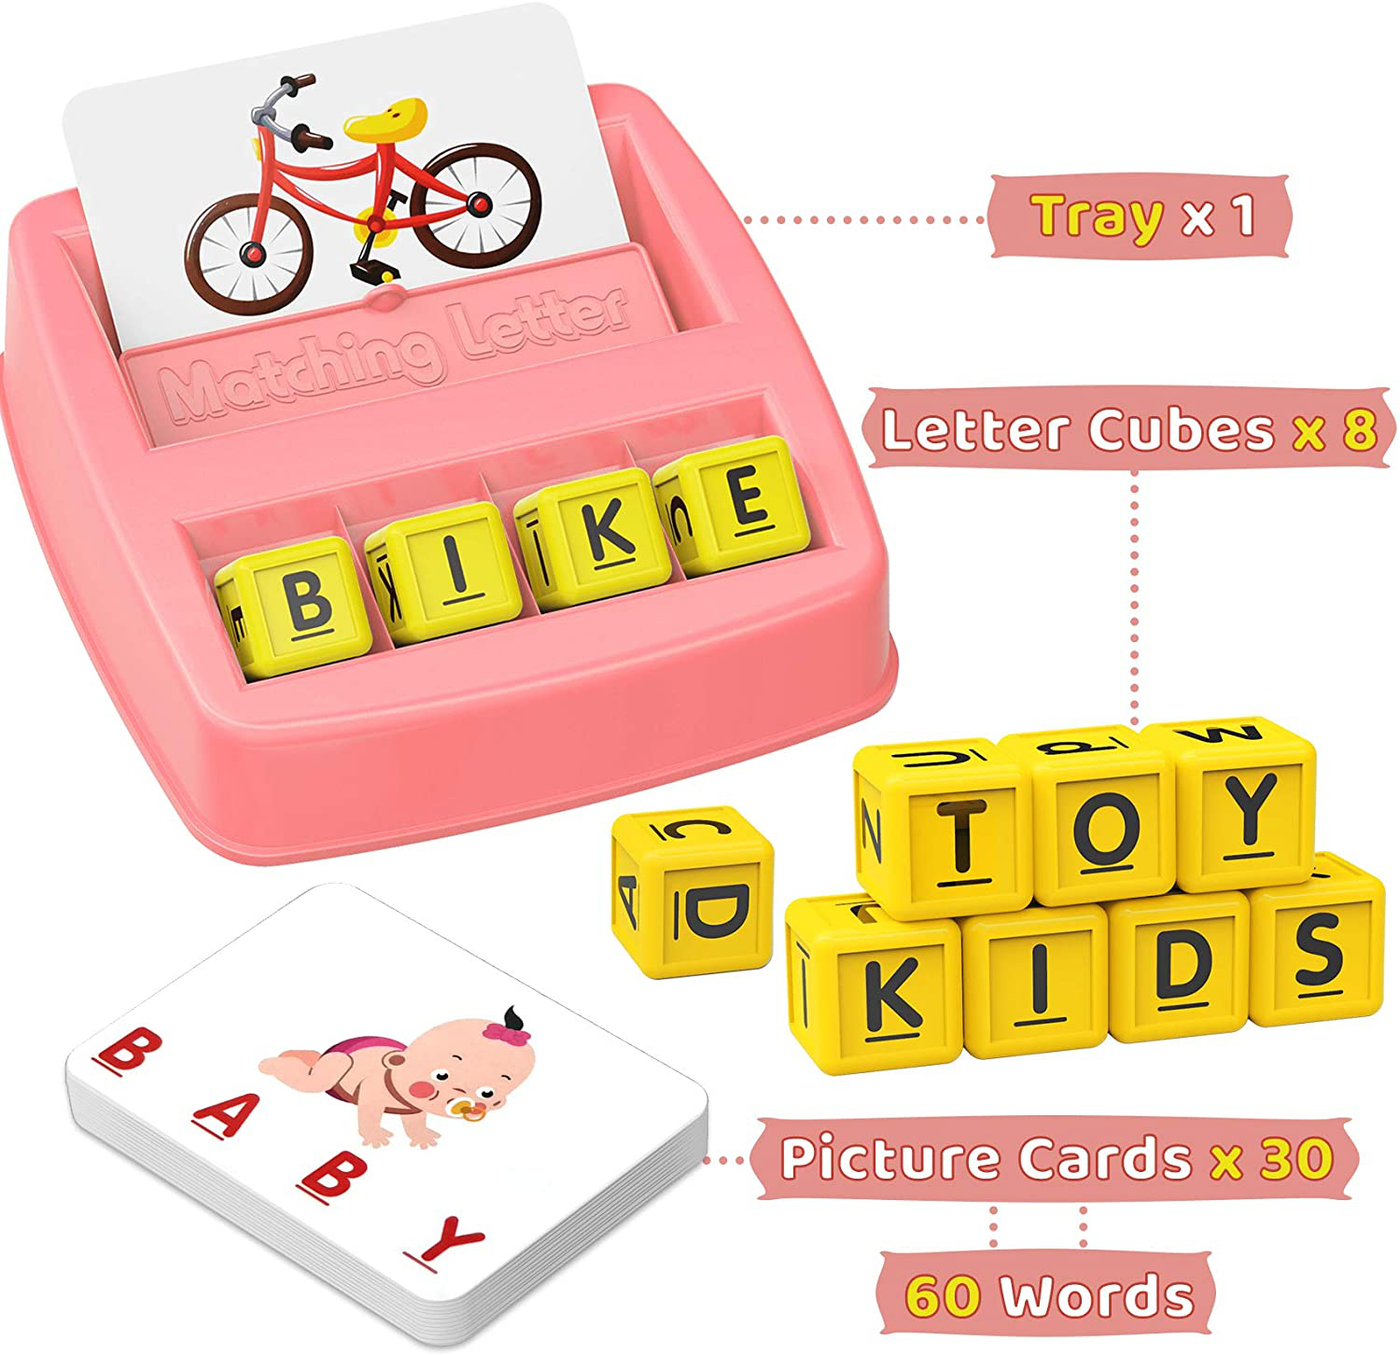 HahaGift Educational Toys for 3-5 Year Old Boy Girl Gifts, Matching Letter Learning Games Activities, Ideal Christmas Birthday Gift for Toddler Kids Age 2 3 4 5 Year Olds Boys Girls